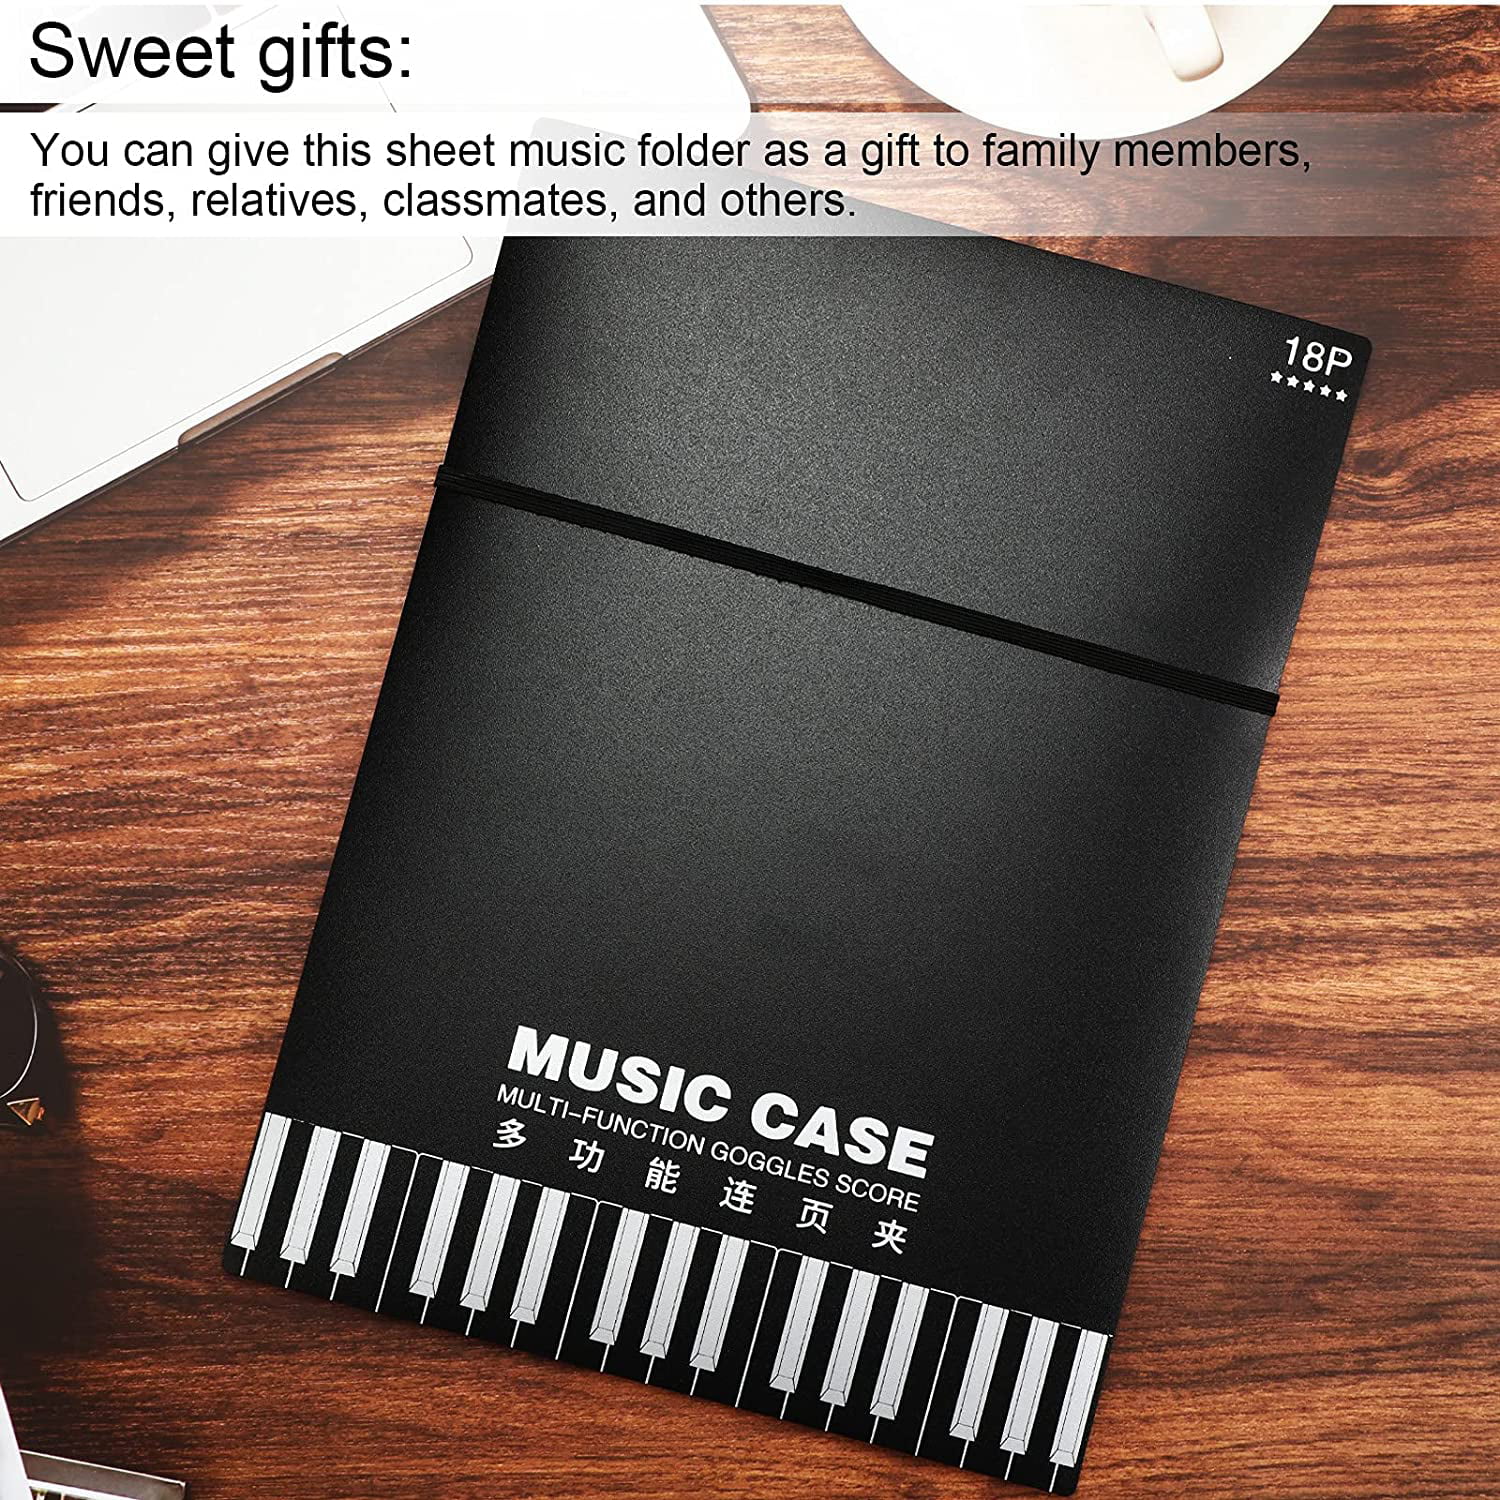 Files and Drawings Multi-Purpose File Storage Folder one White Musical Score Folder for Office Writing and File Storage Music Folder for modifying Scores Plastic A4 Size 6 Pockets 